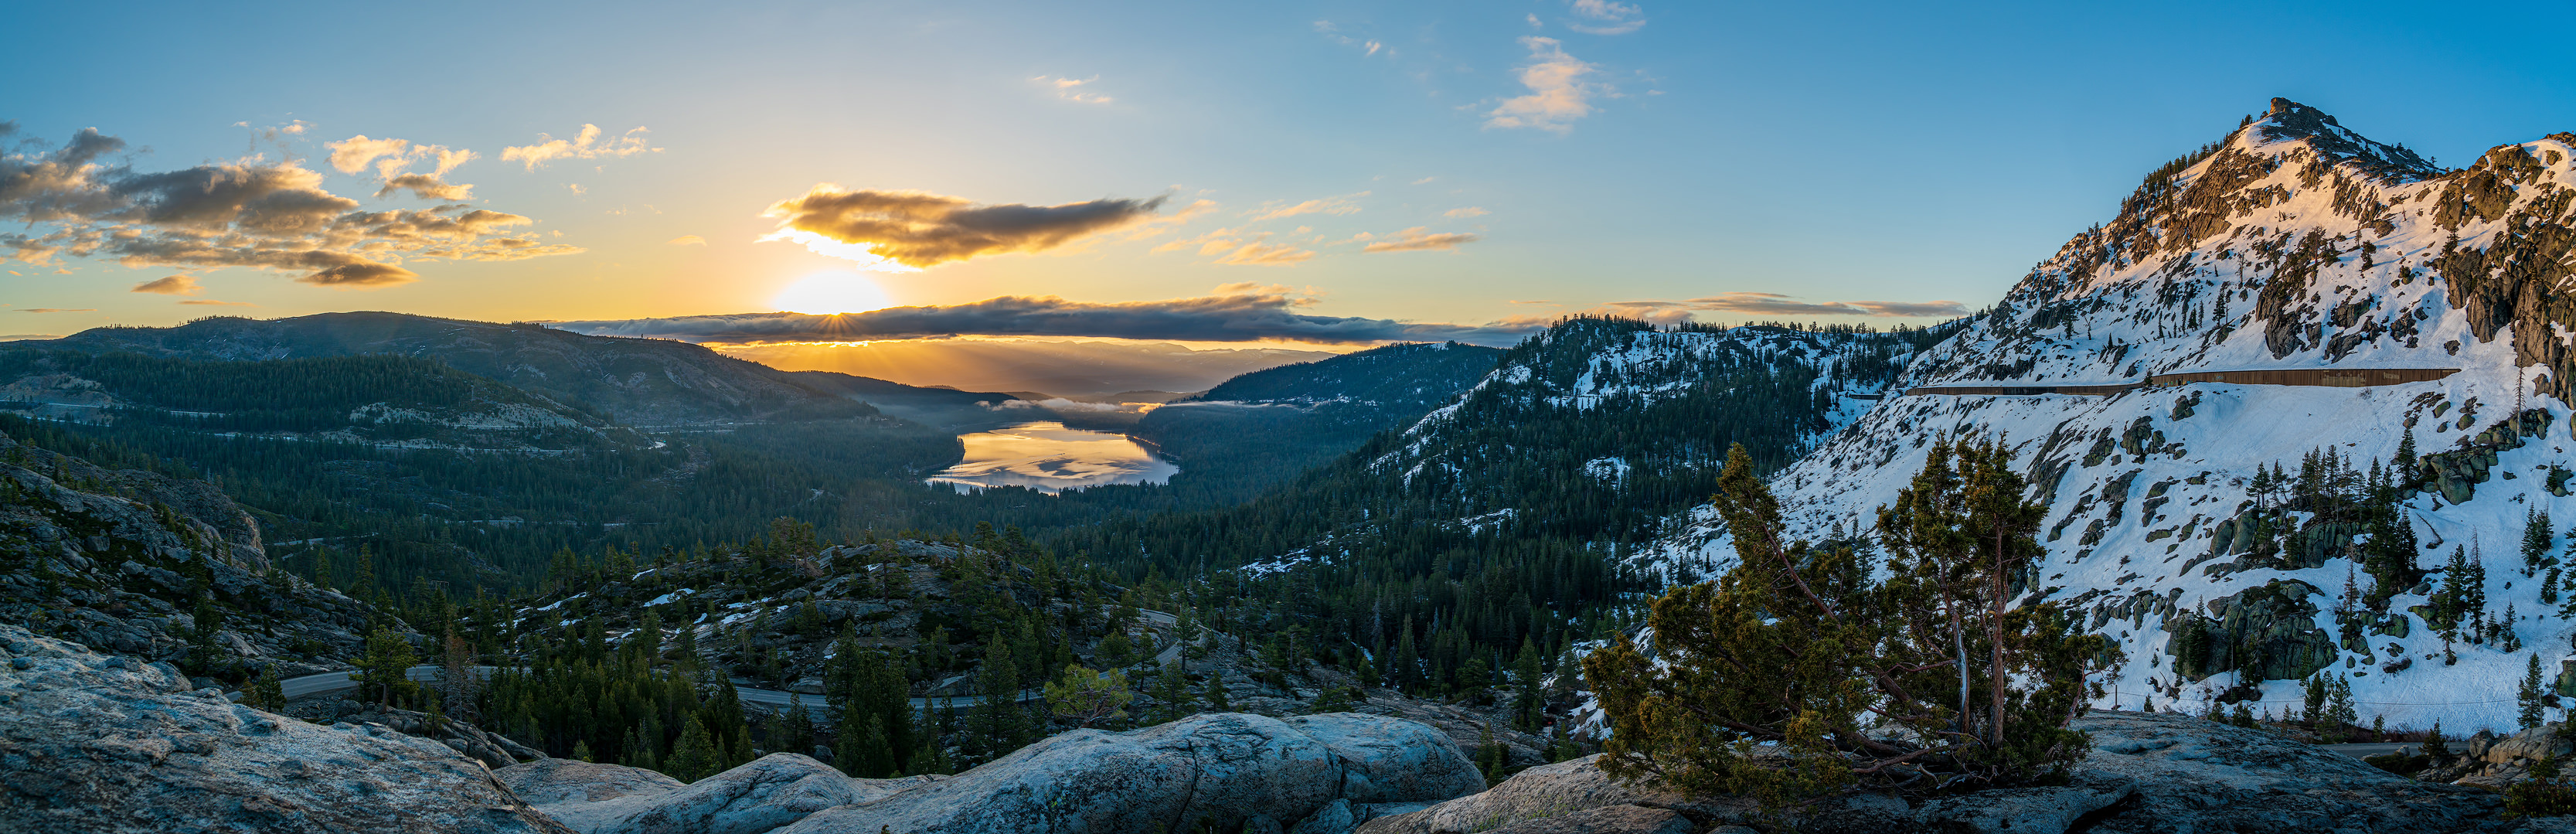 Sunrise At Donner Pass